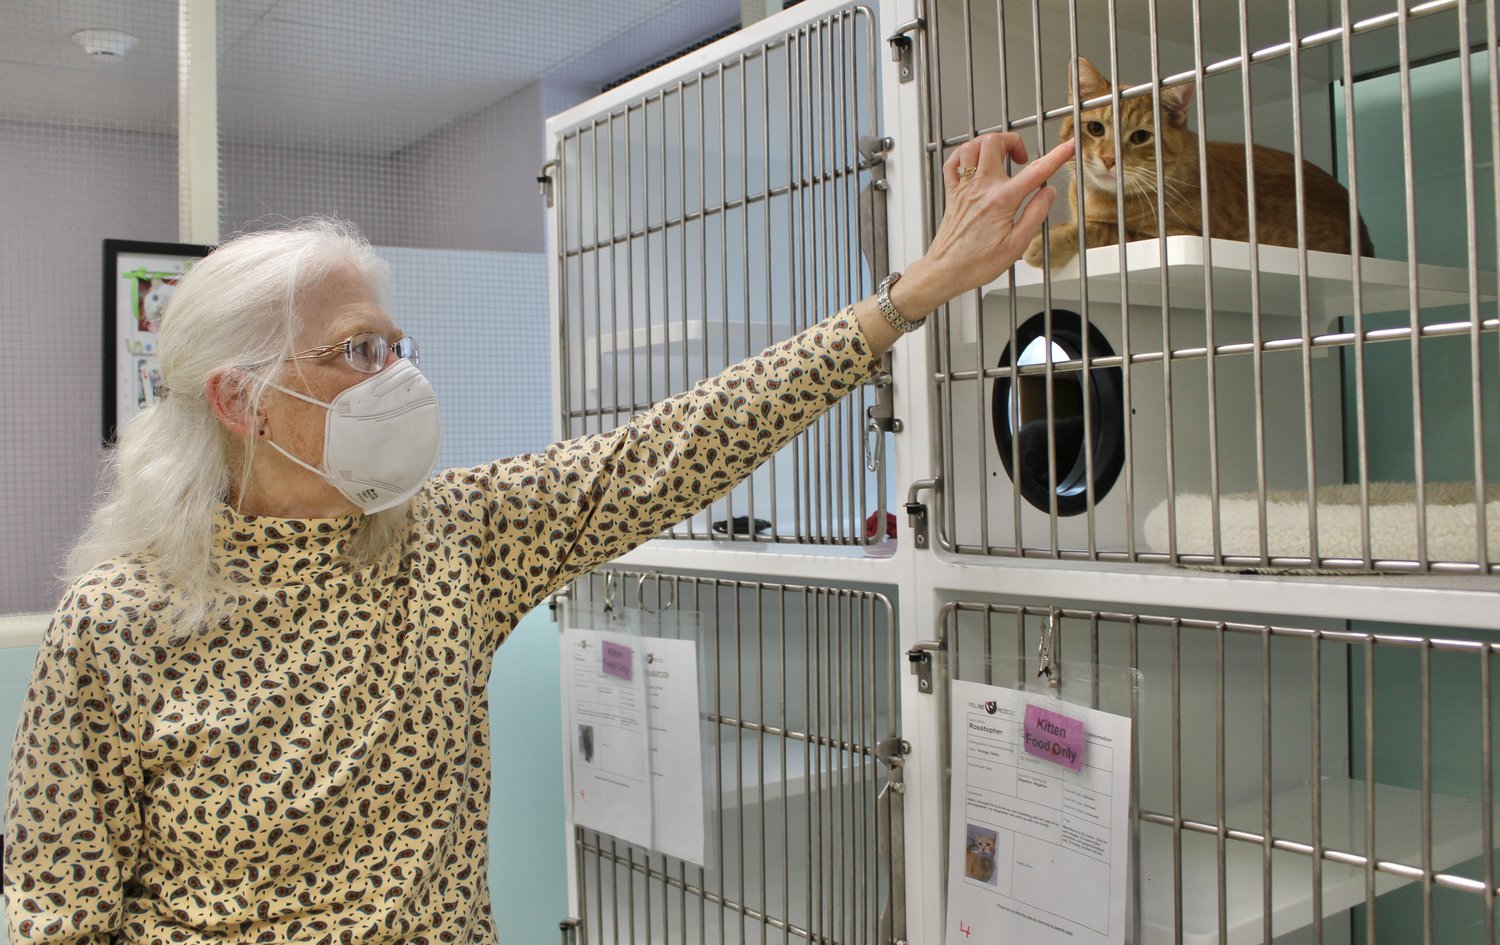 Volunteer Gail Frethem plays with Rosstopher at the shelter. (Photo by Penny Fuller)